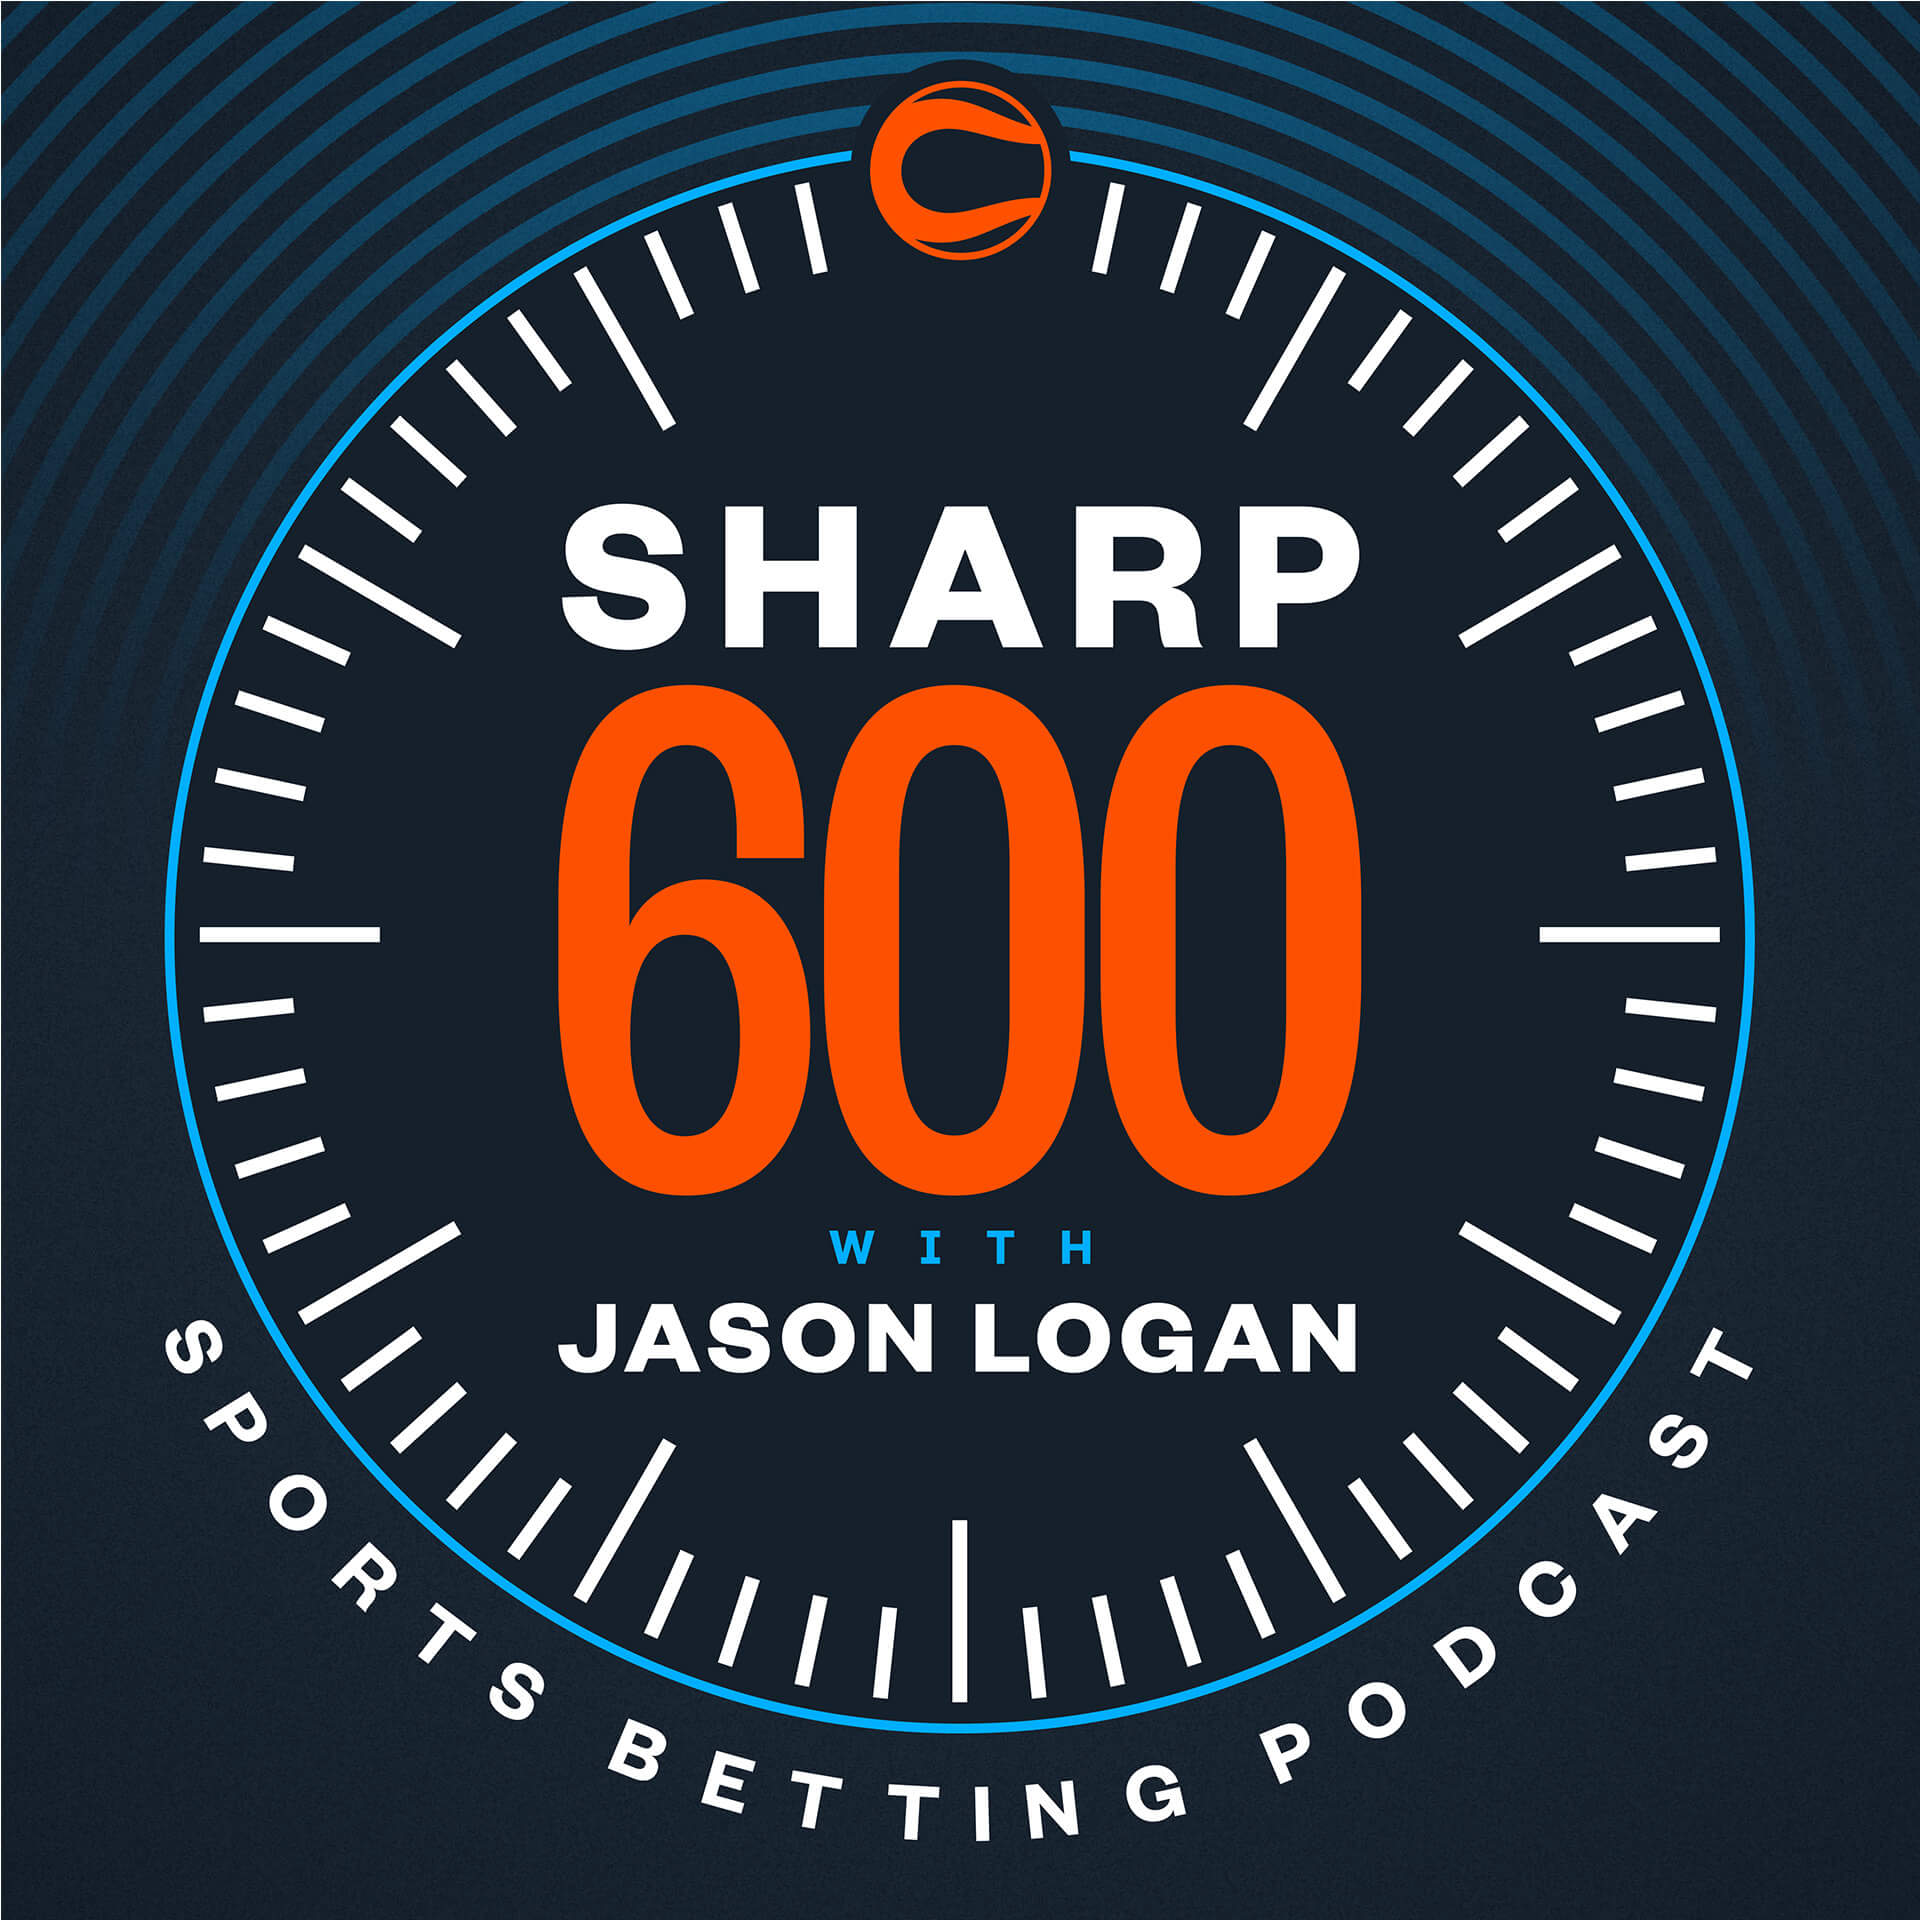 How To Bet - The Sharp 600 Podcast: Watch/Listen Every Tuesday and Friday